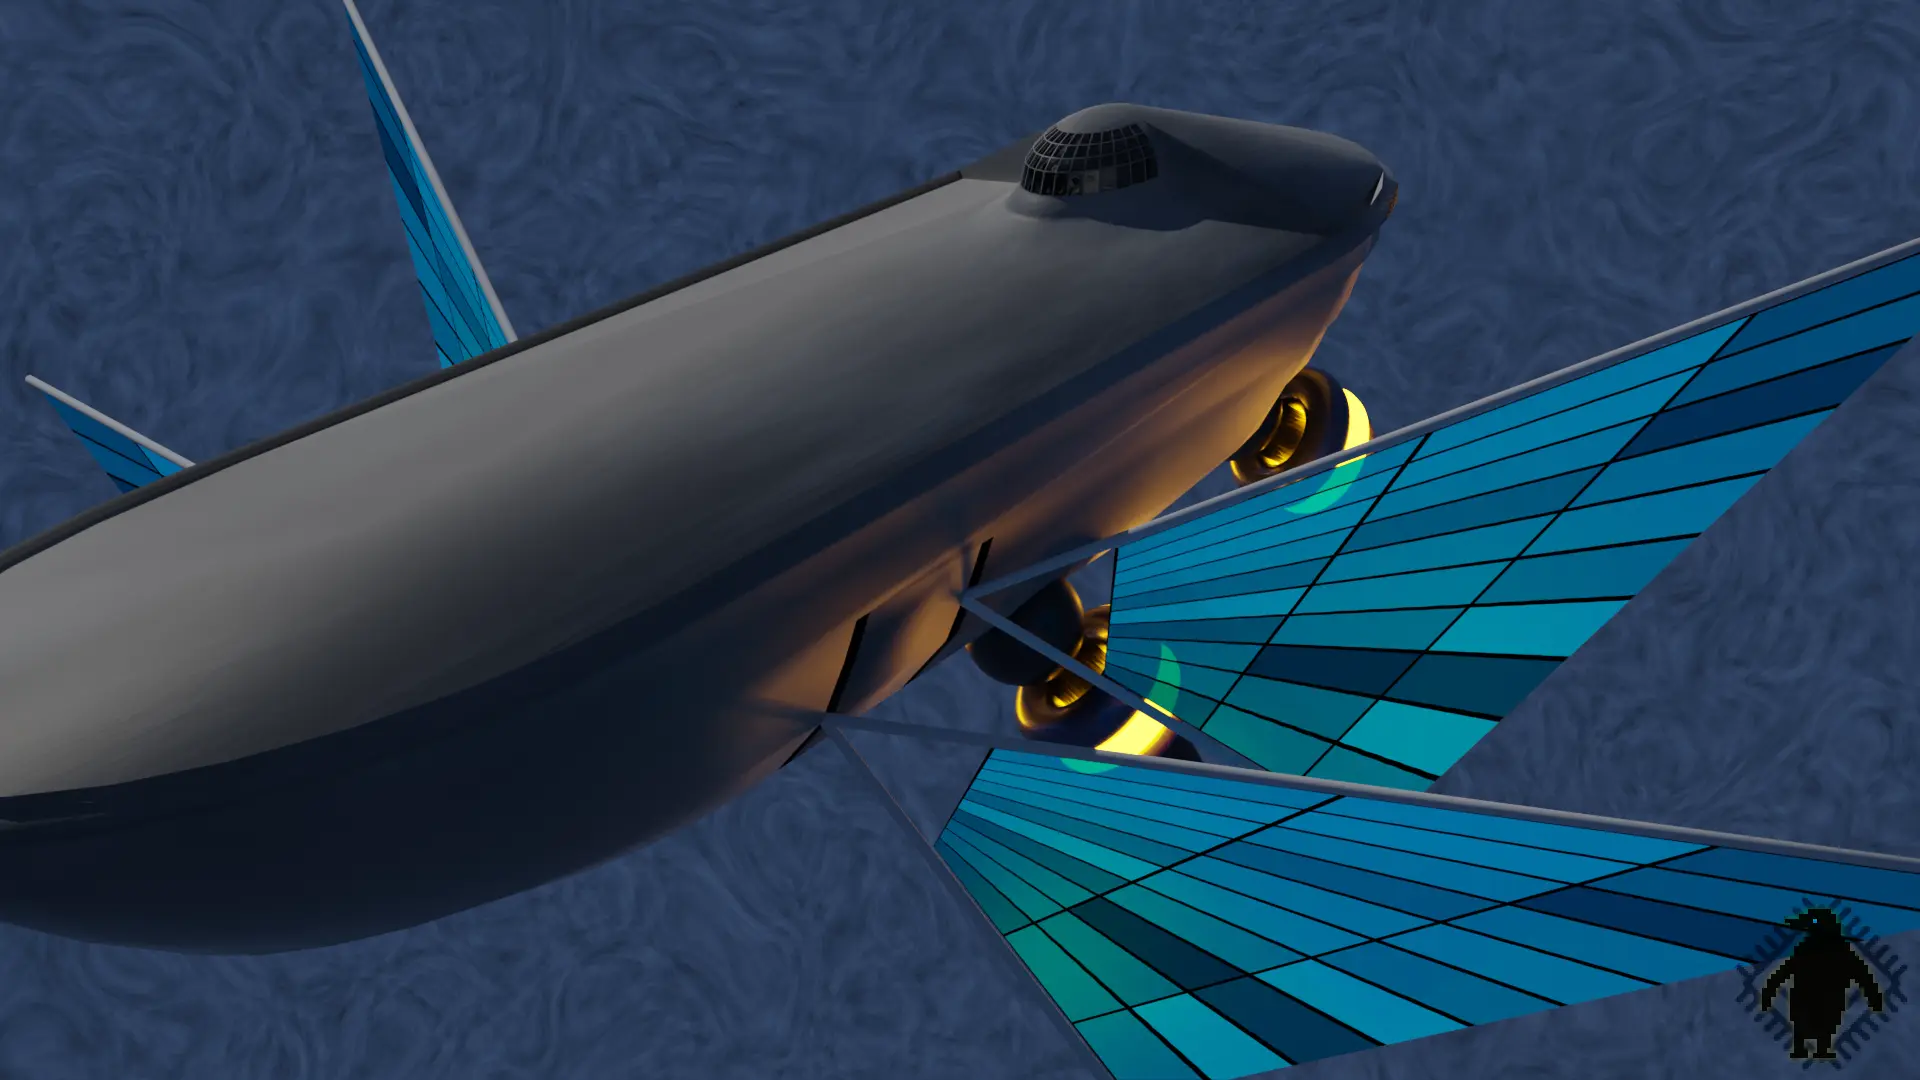 A 3D rendering of a sci-fi airship.